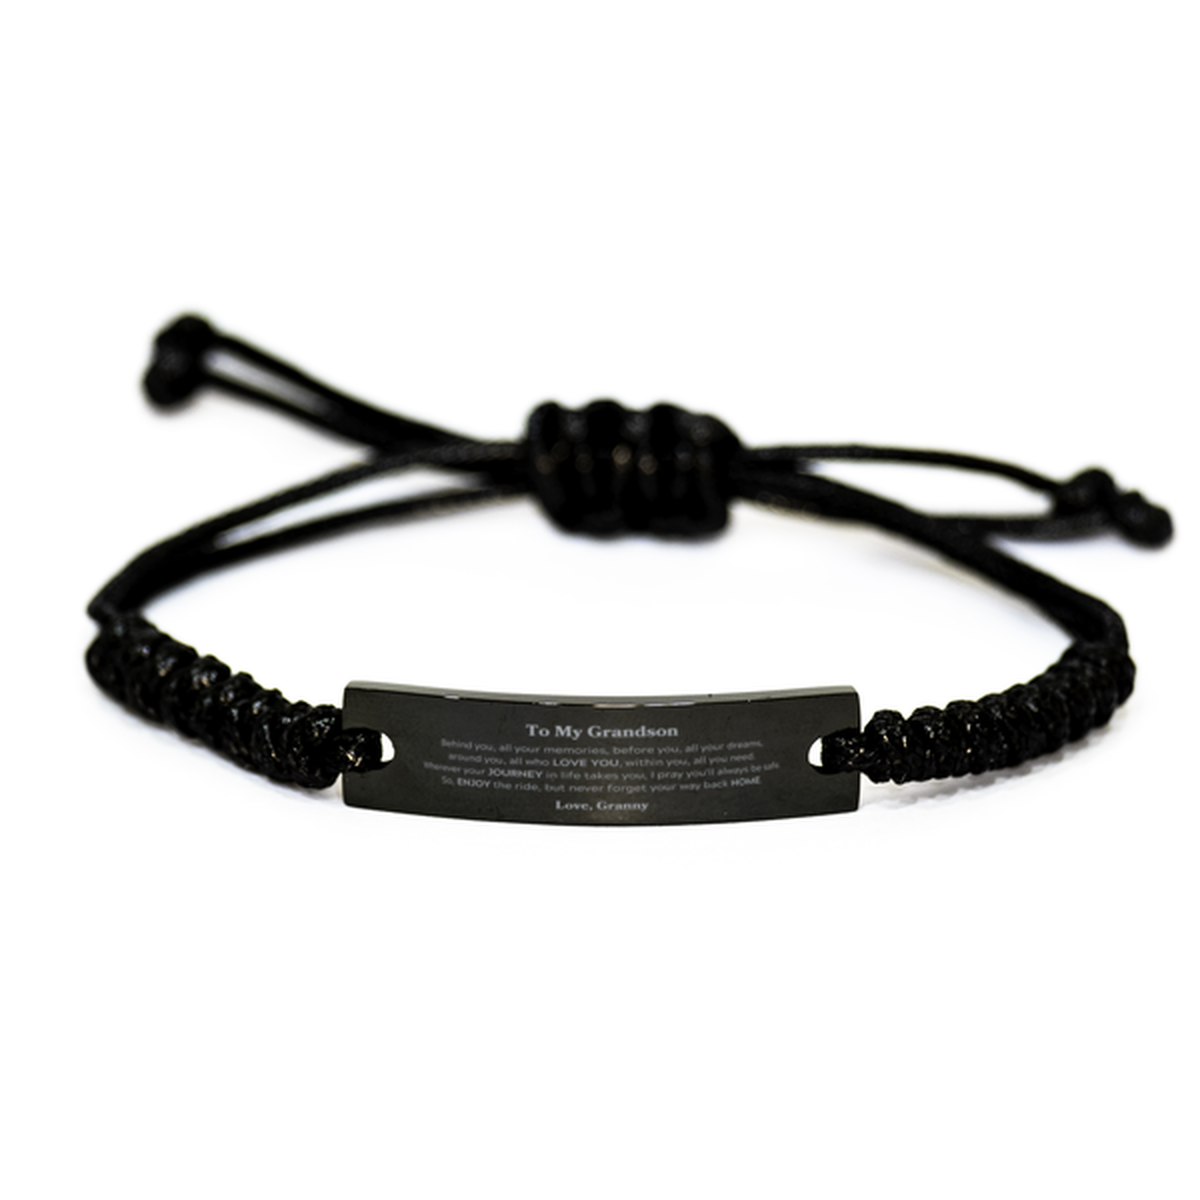 To My Grandson Graduation Gifts from Granny, Grandson Black Rope Bracelet Christmas Birthday Gifts for Grandson Behind you, all your memories, before you, all your dreams. Love, Granny